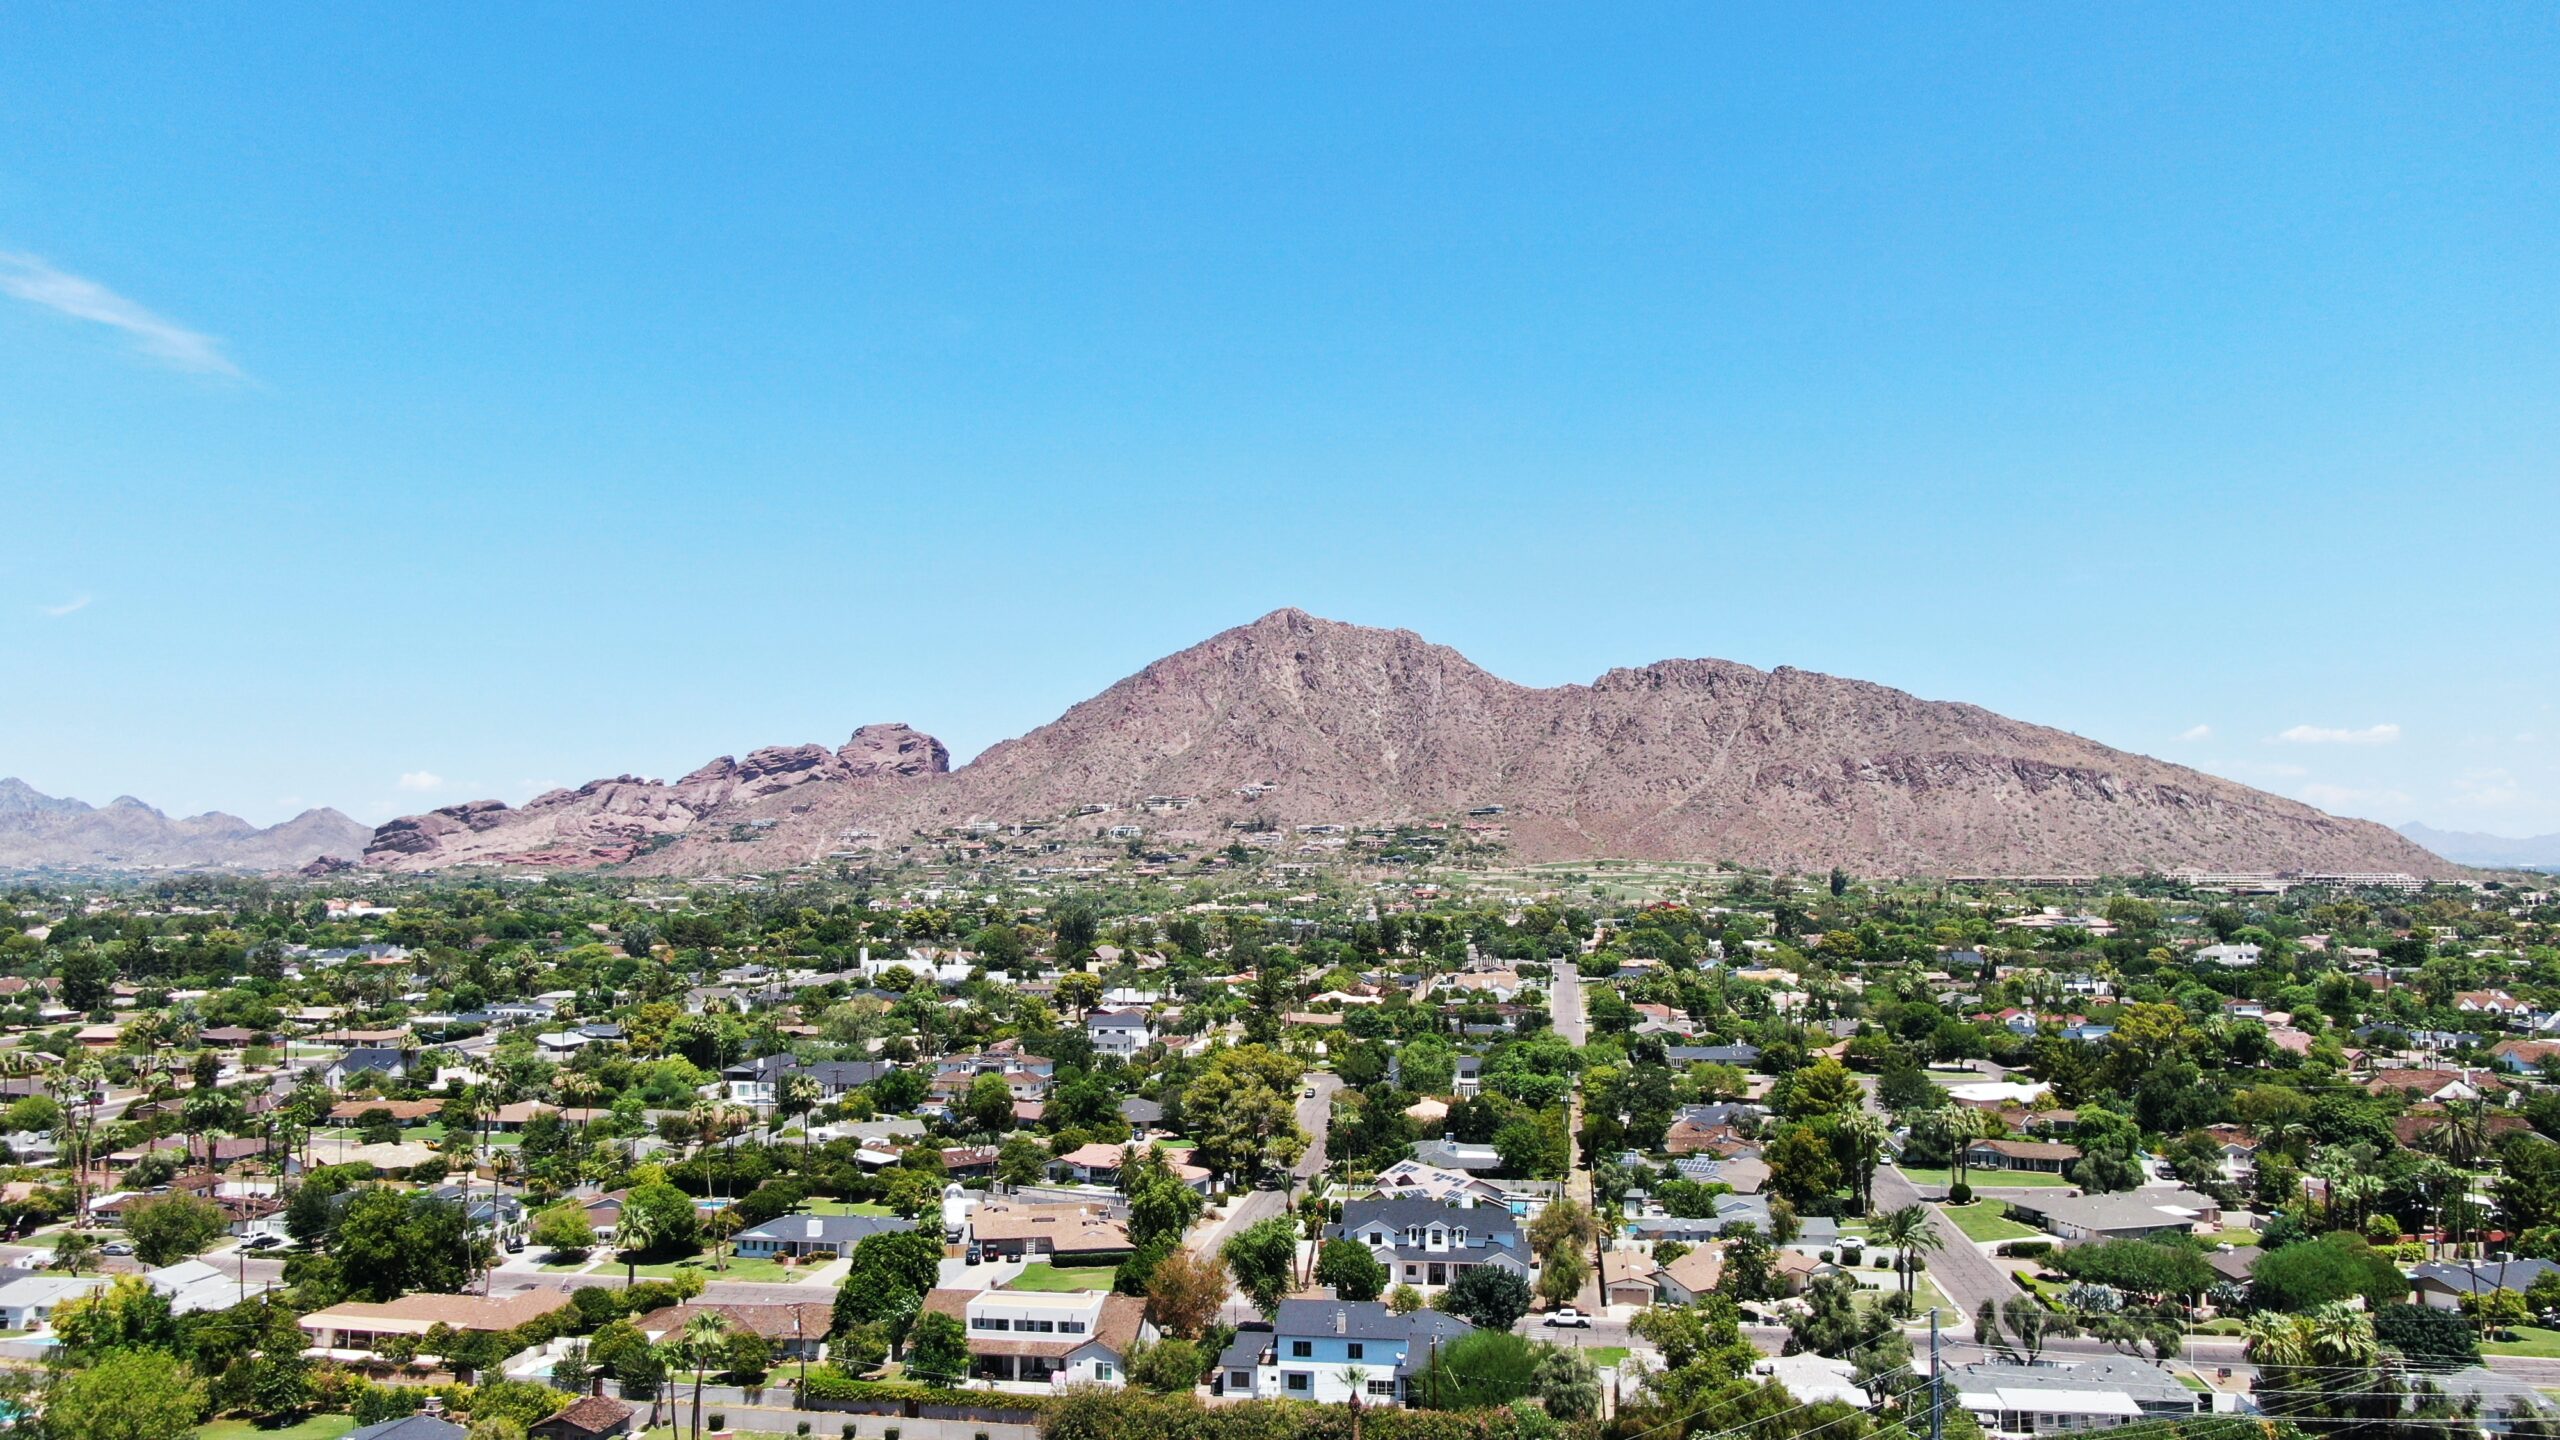 Aerial overview of a tree-filled residential area in Camelback Mountain located in Phoeniz Arizon. There are clear blue skies and mountains in the back, overlooking the neighborhood.